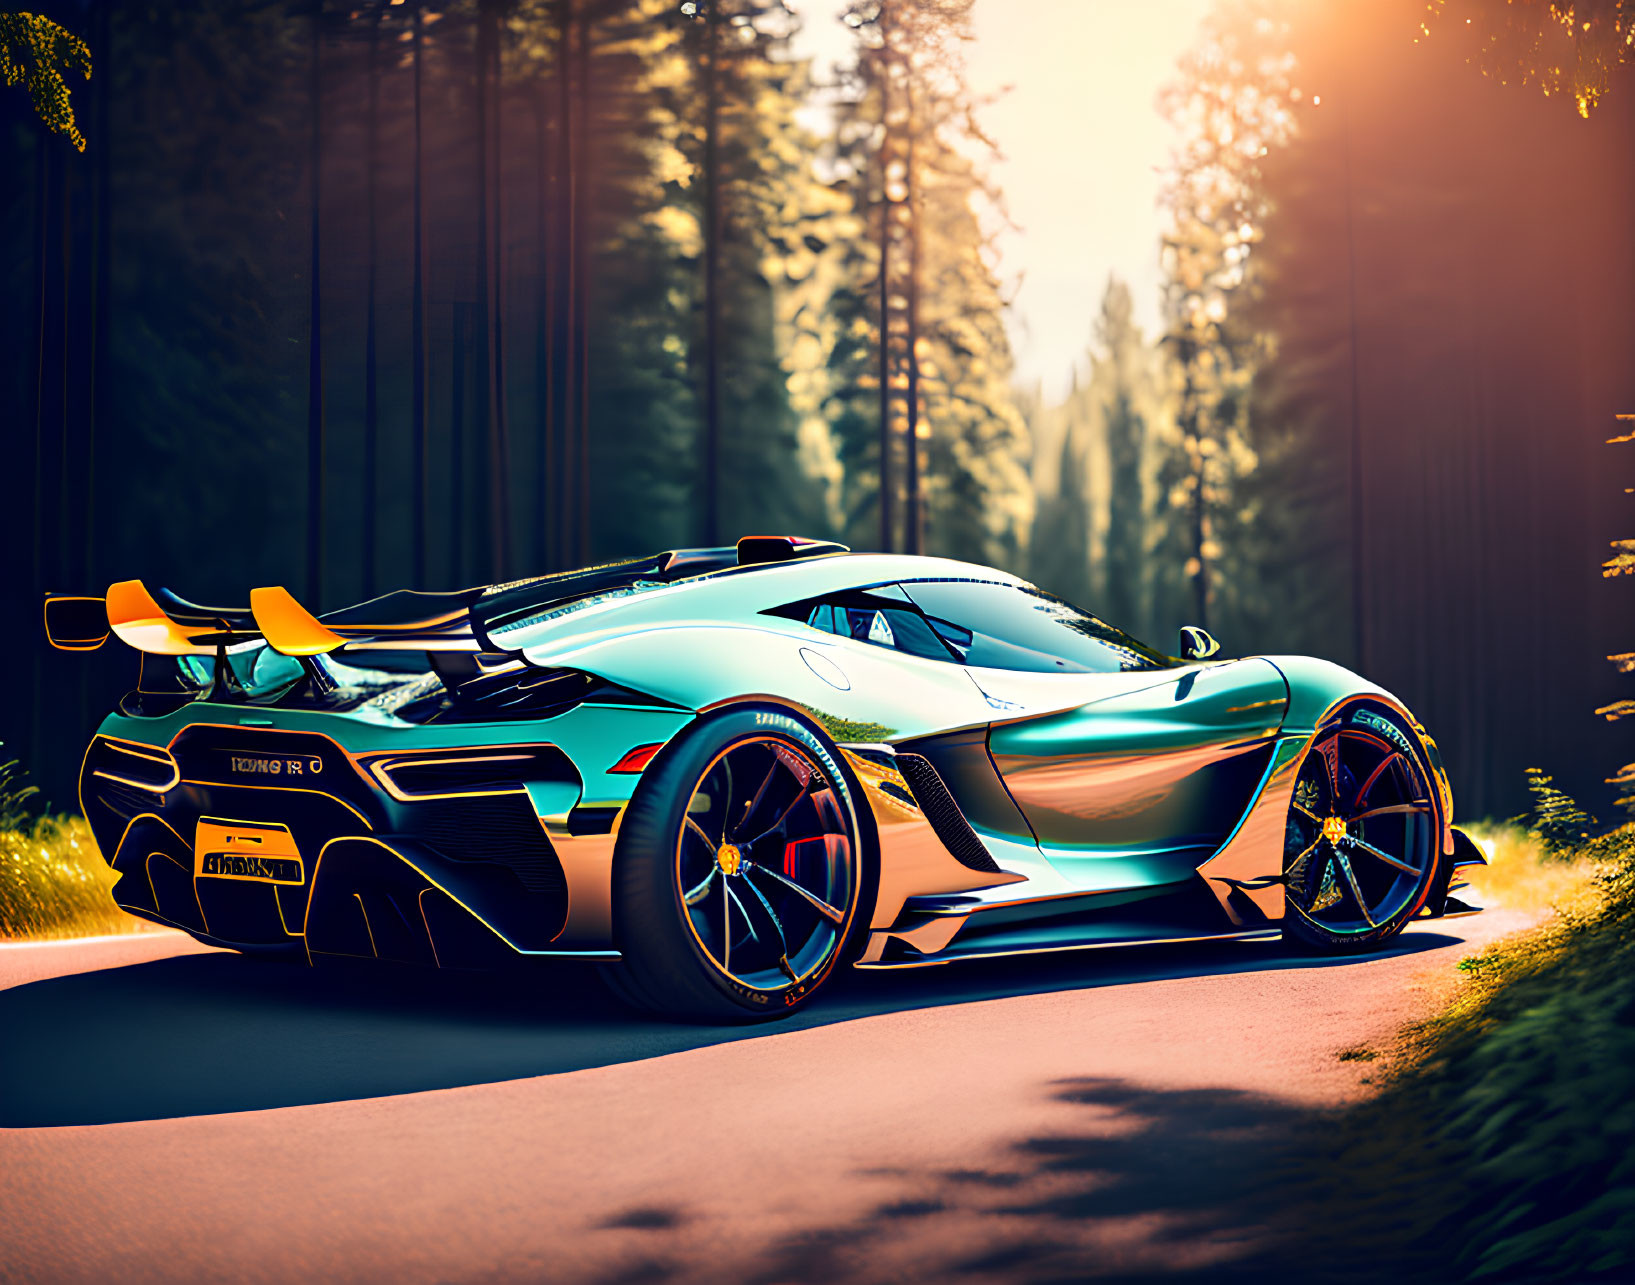 Vibrant sports car with reflective paint in forest setting